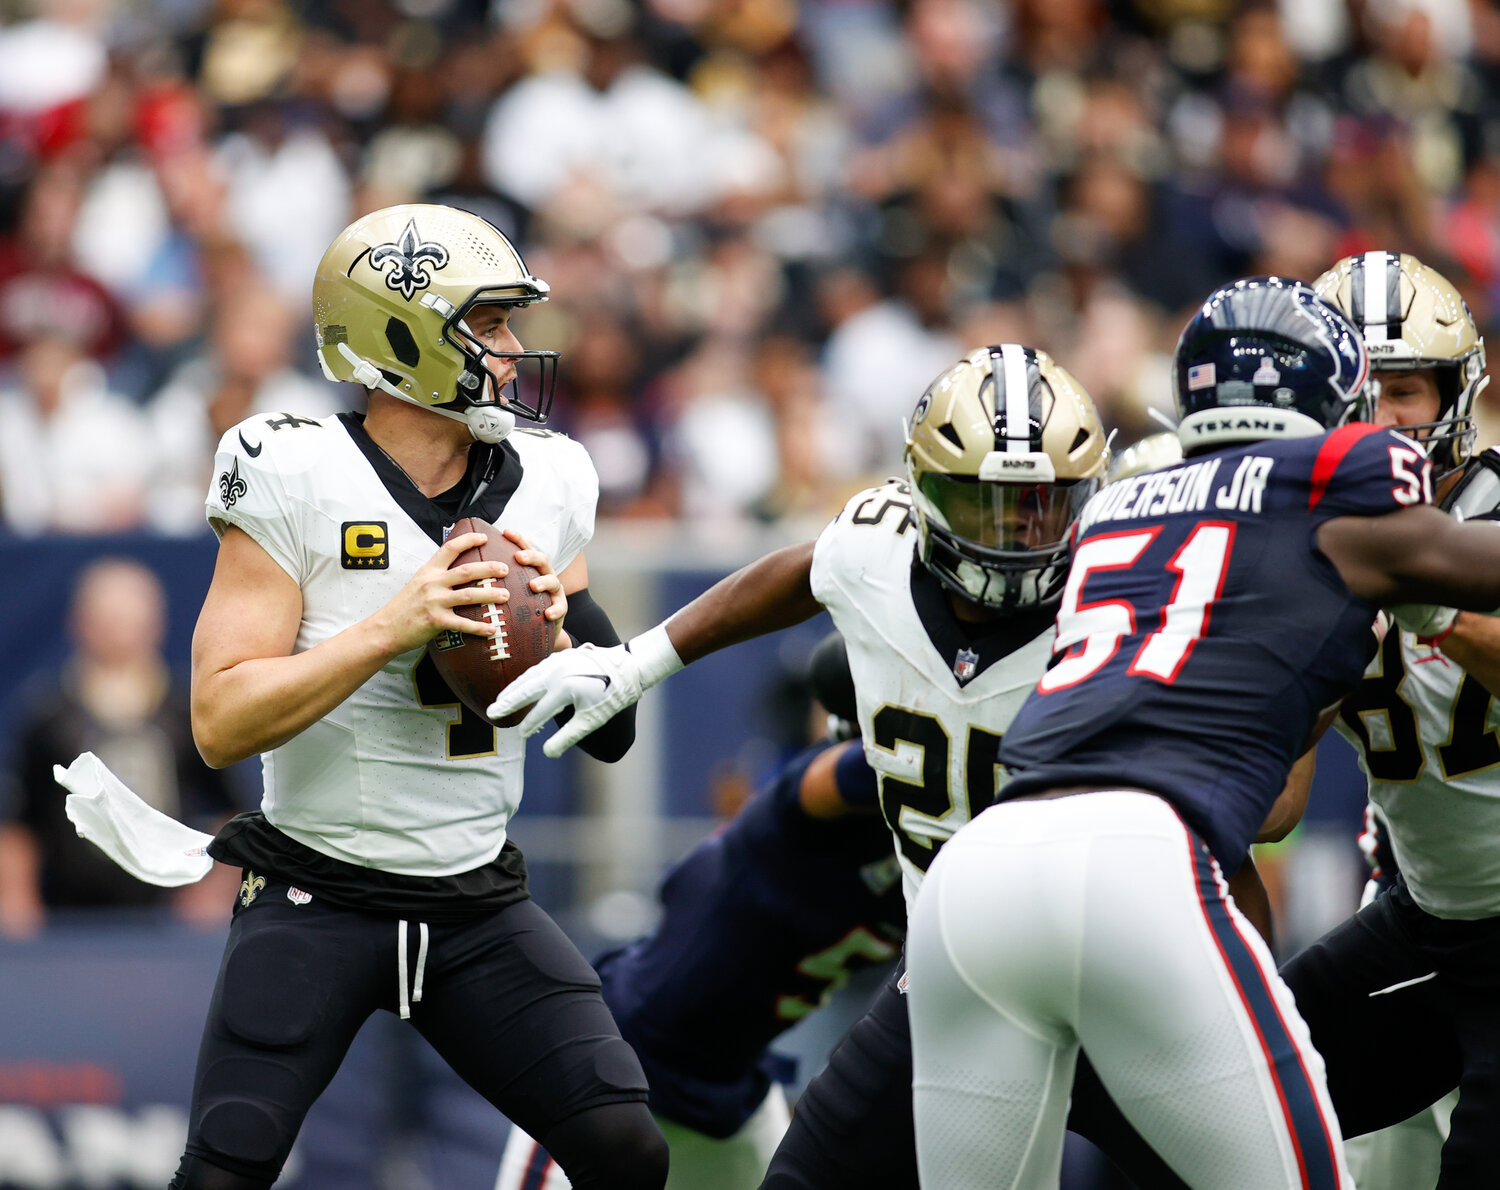 Saints quarterback Derek Carr (4) looks to pass during an NFL game between the Texans and the Saints on October 15, 2023 in Houston. The Texans won, 20-13.